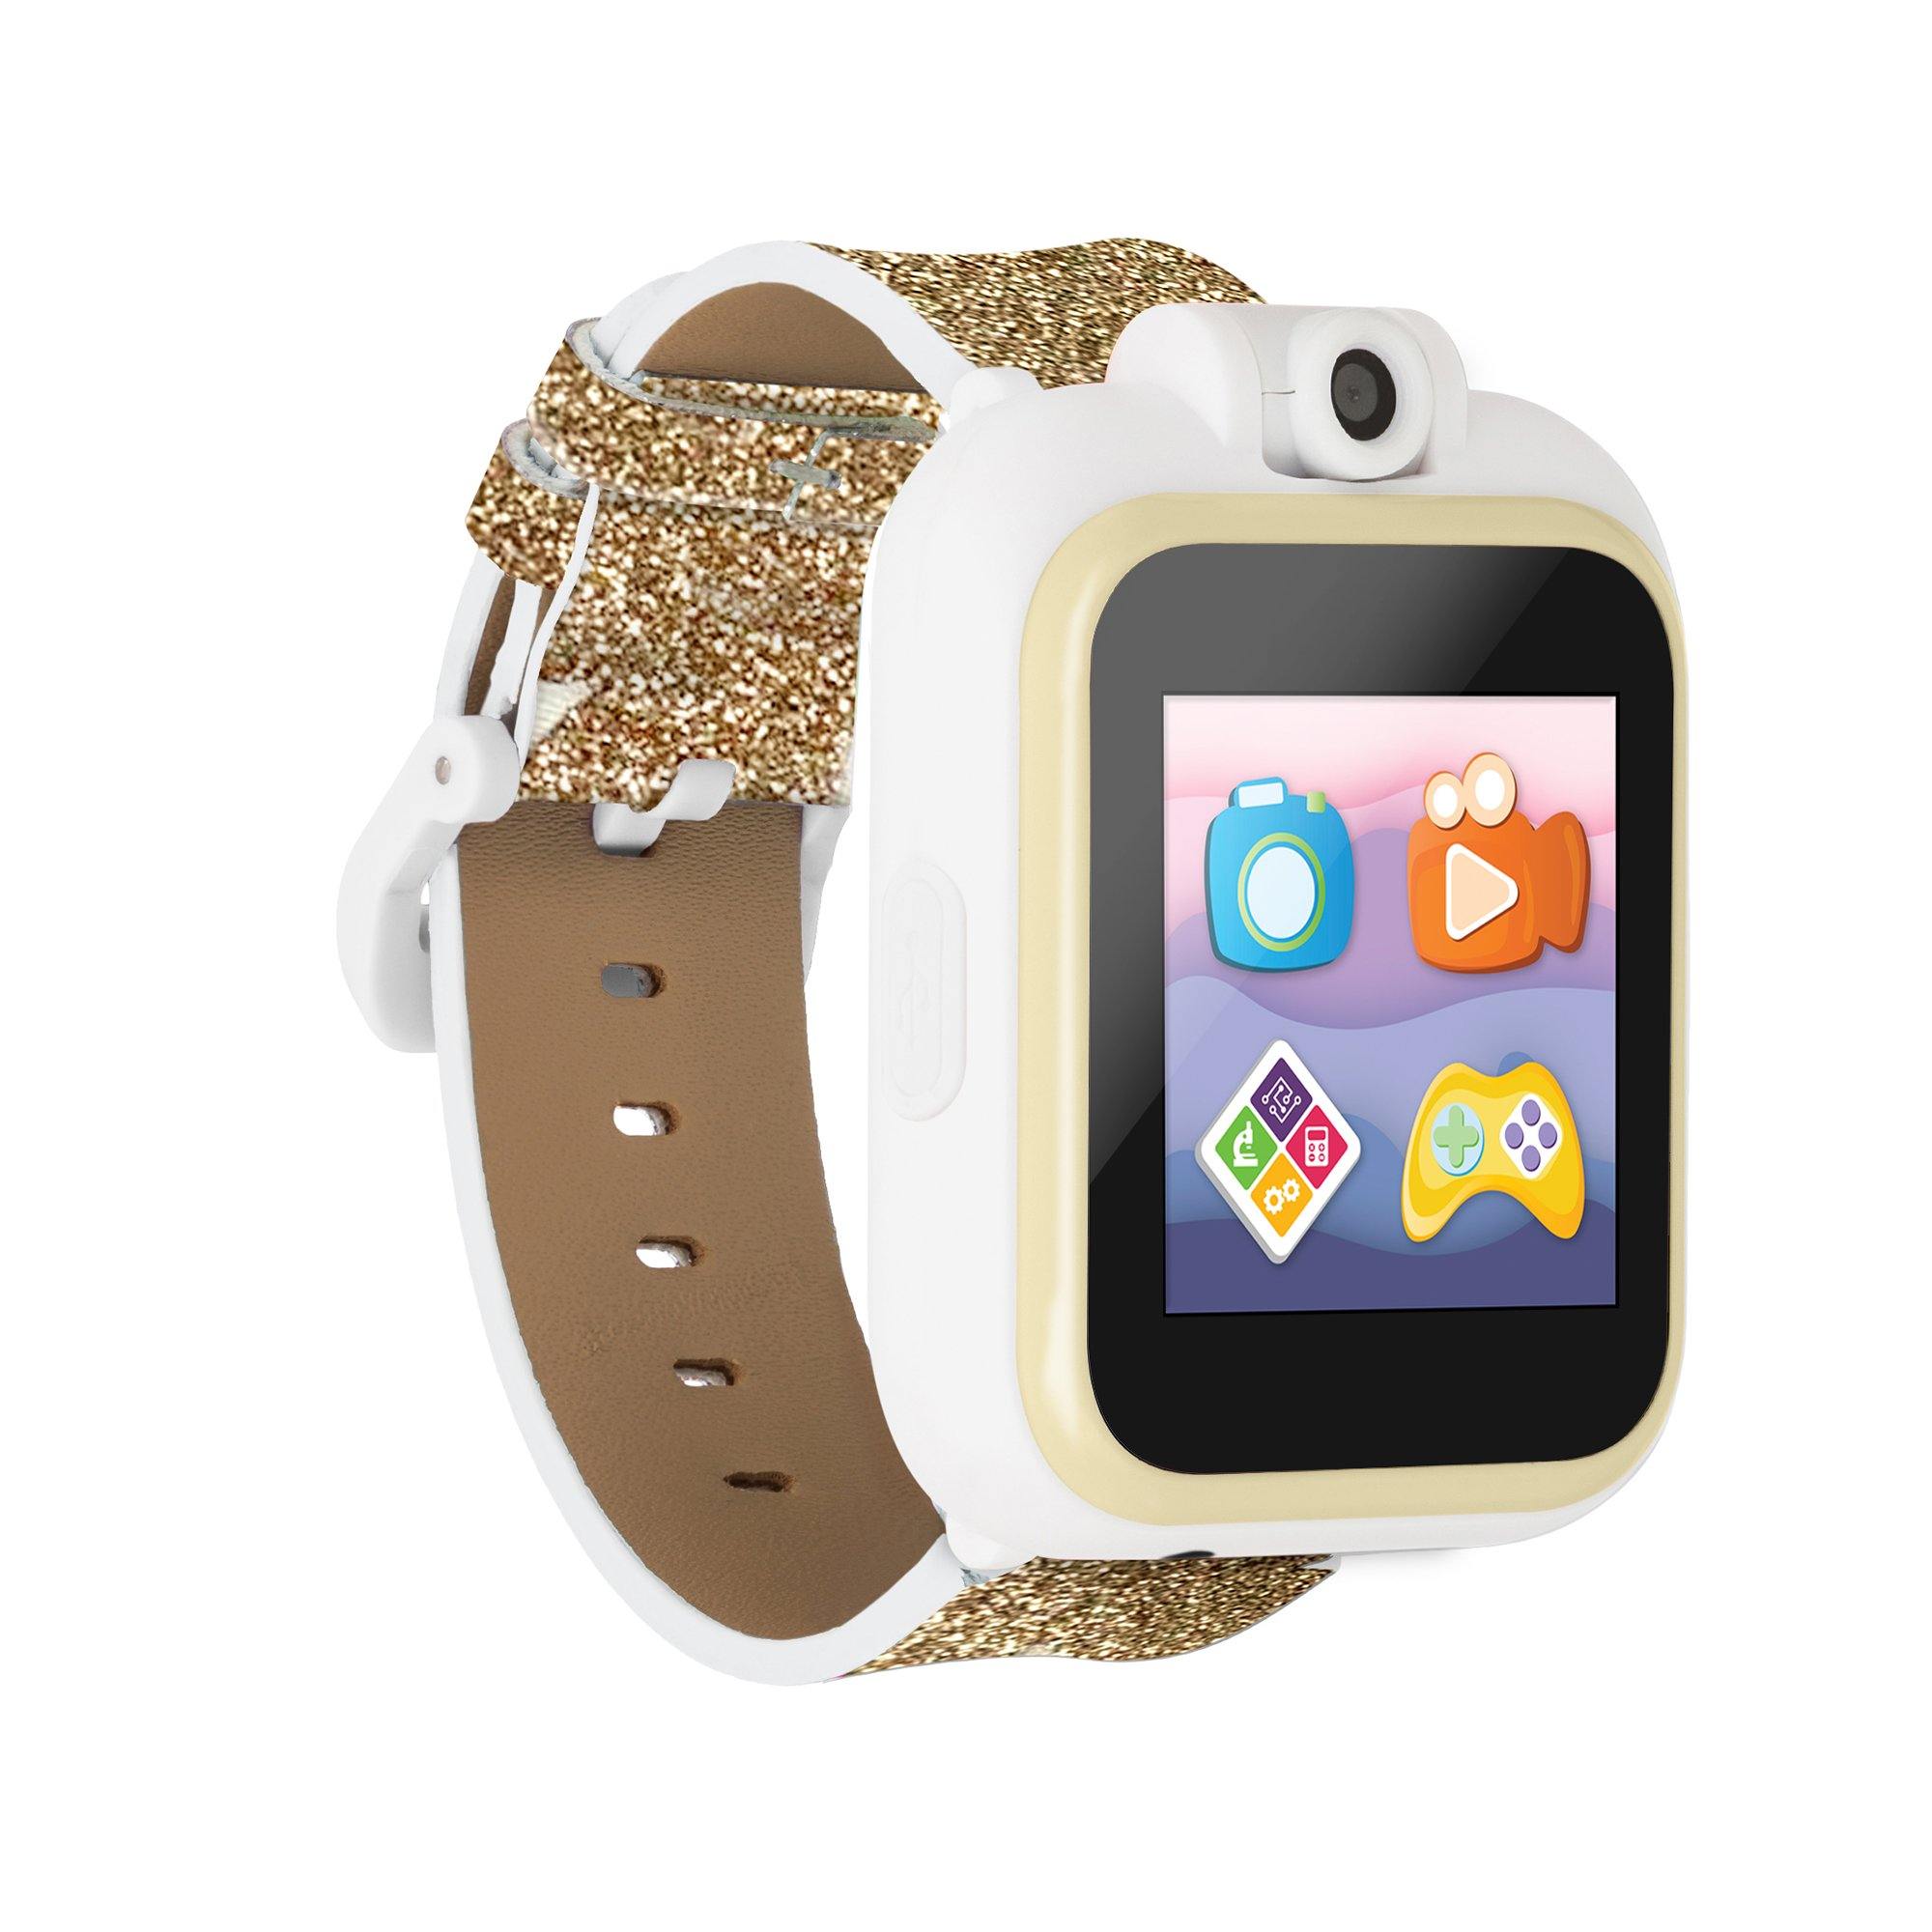 PlayZoom 2 Kids Smartwatch: Gold Star Print affordable smart watch